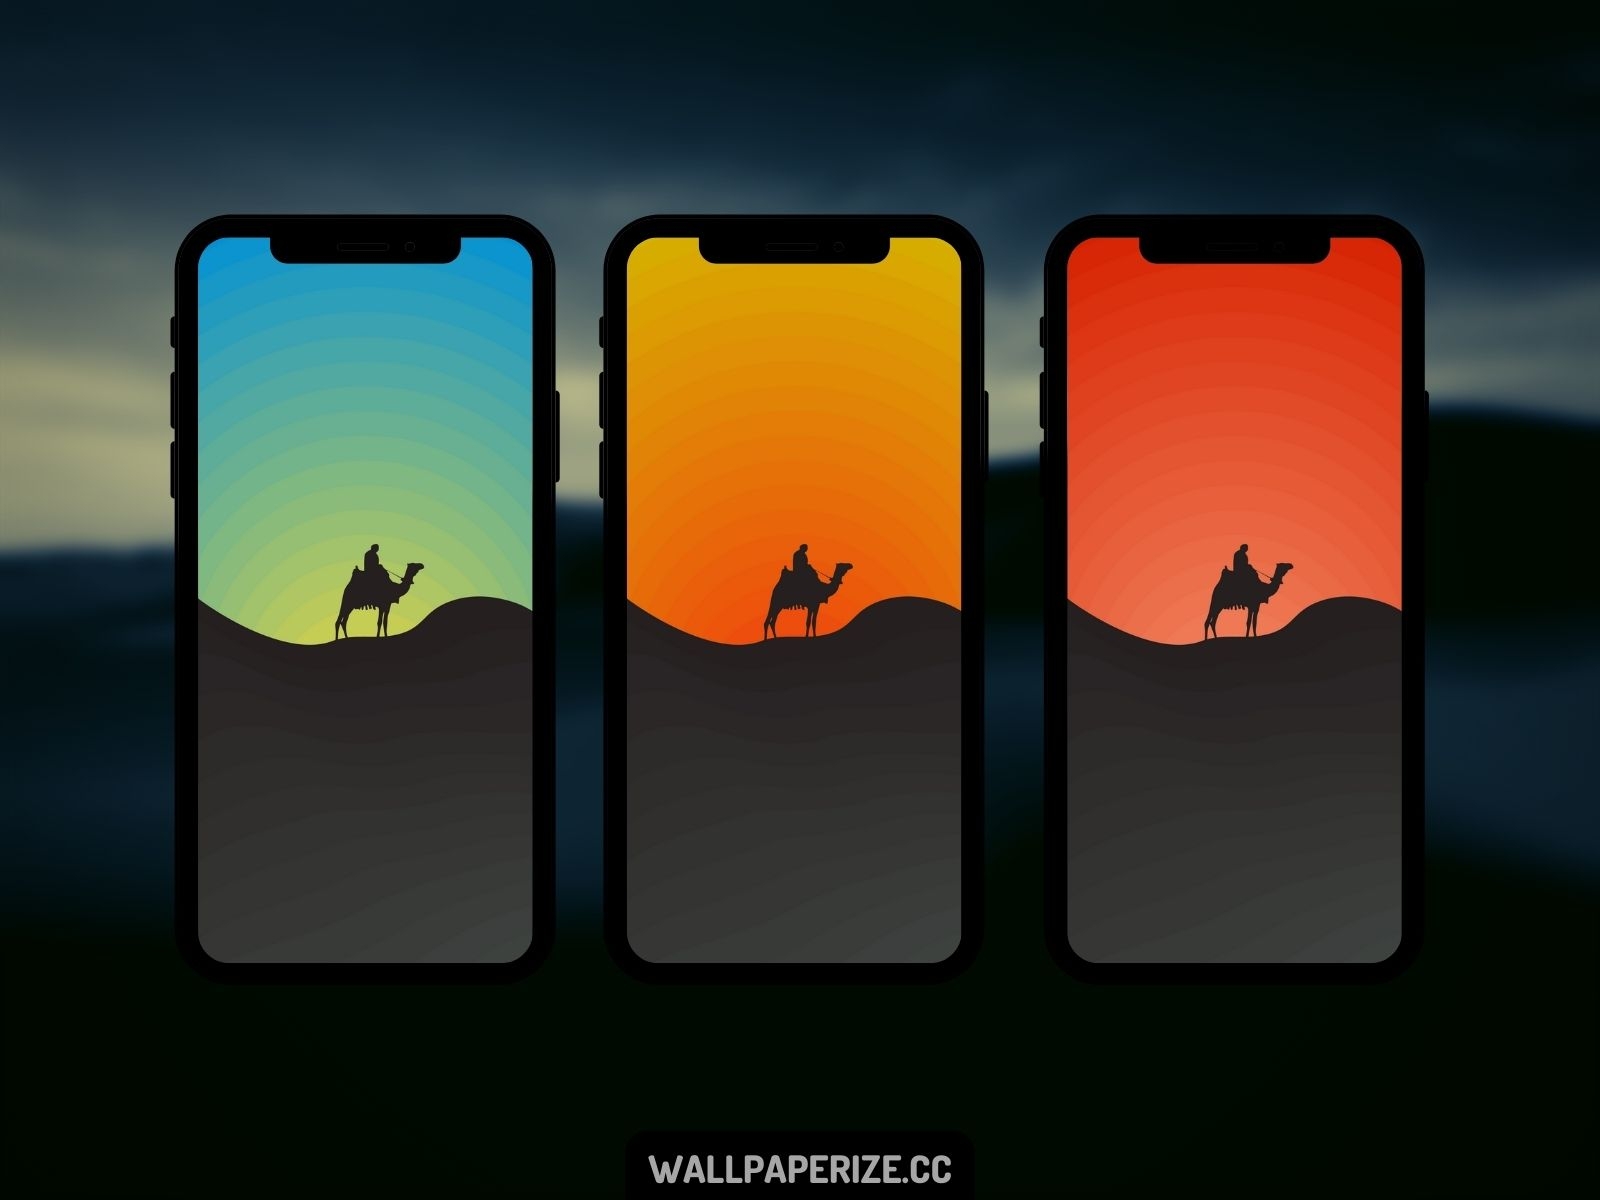 Phone wallpapers - Day and night minimalist view by jorgehardt on DeviantArt